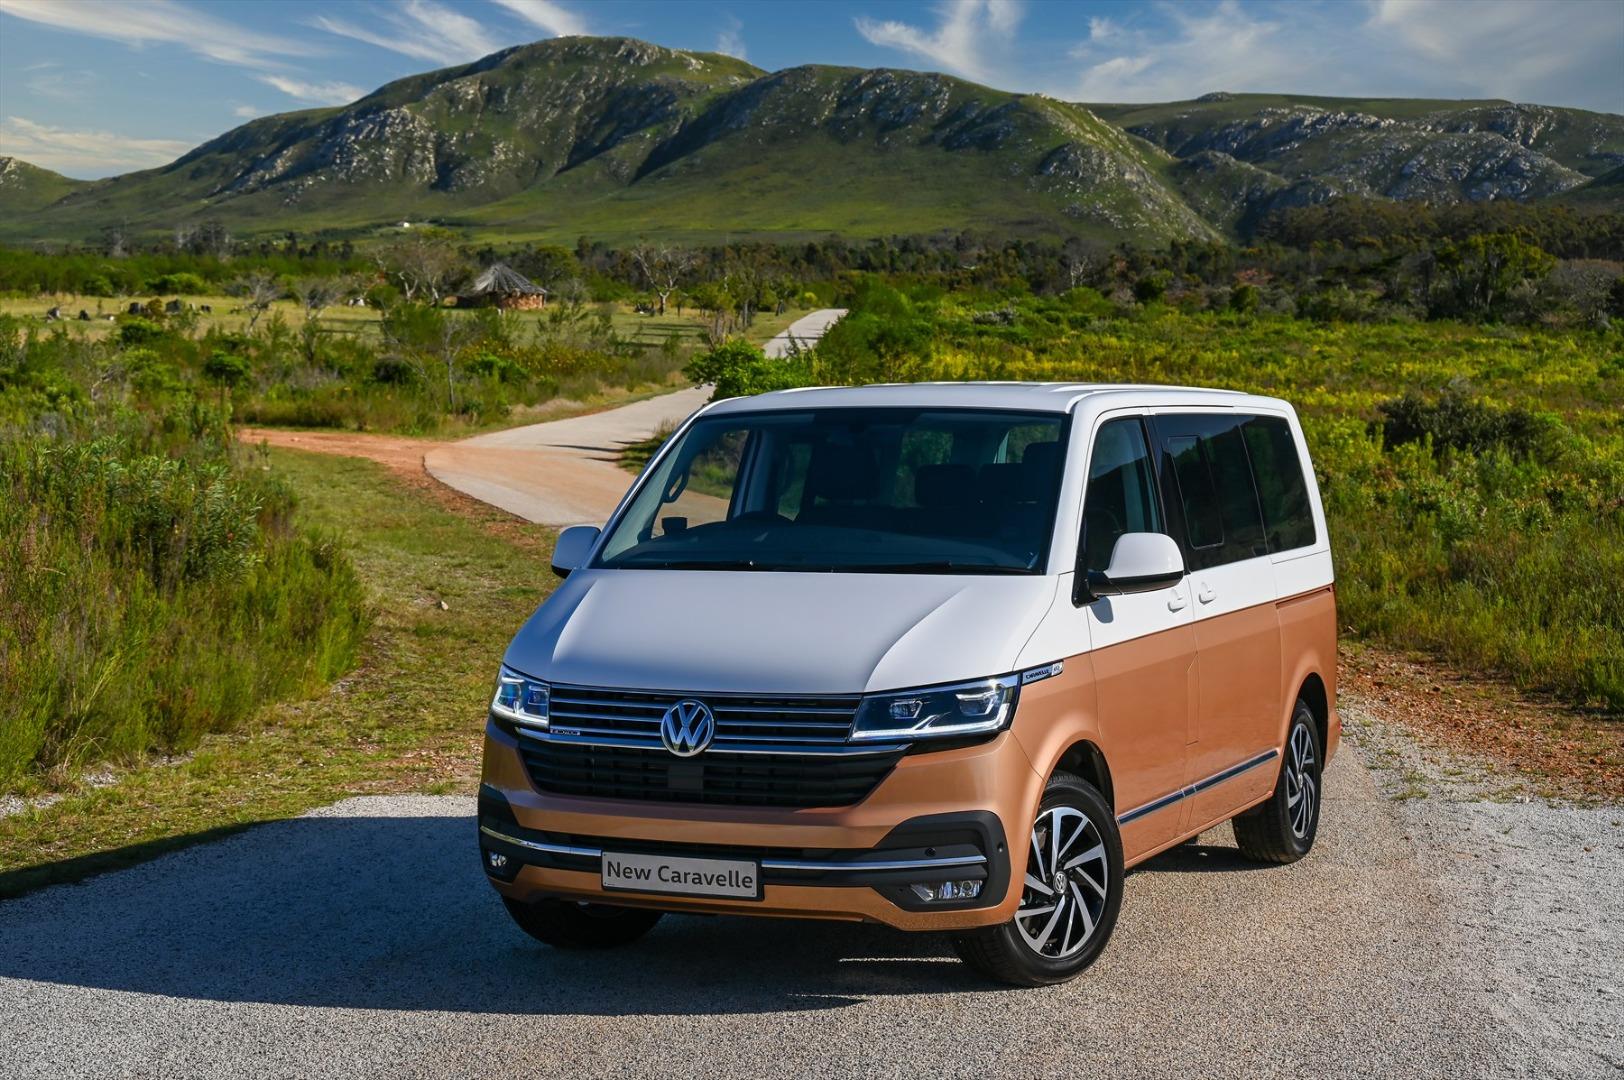 New Volkswagen Caravelle 6.1 test drive: Be sure to check out these